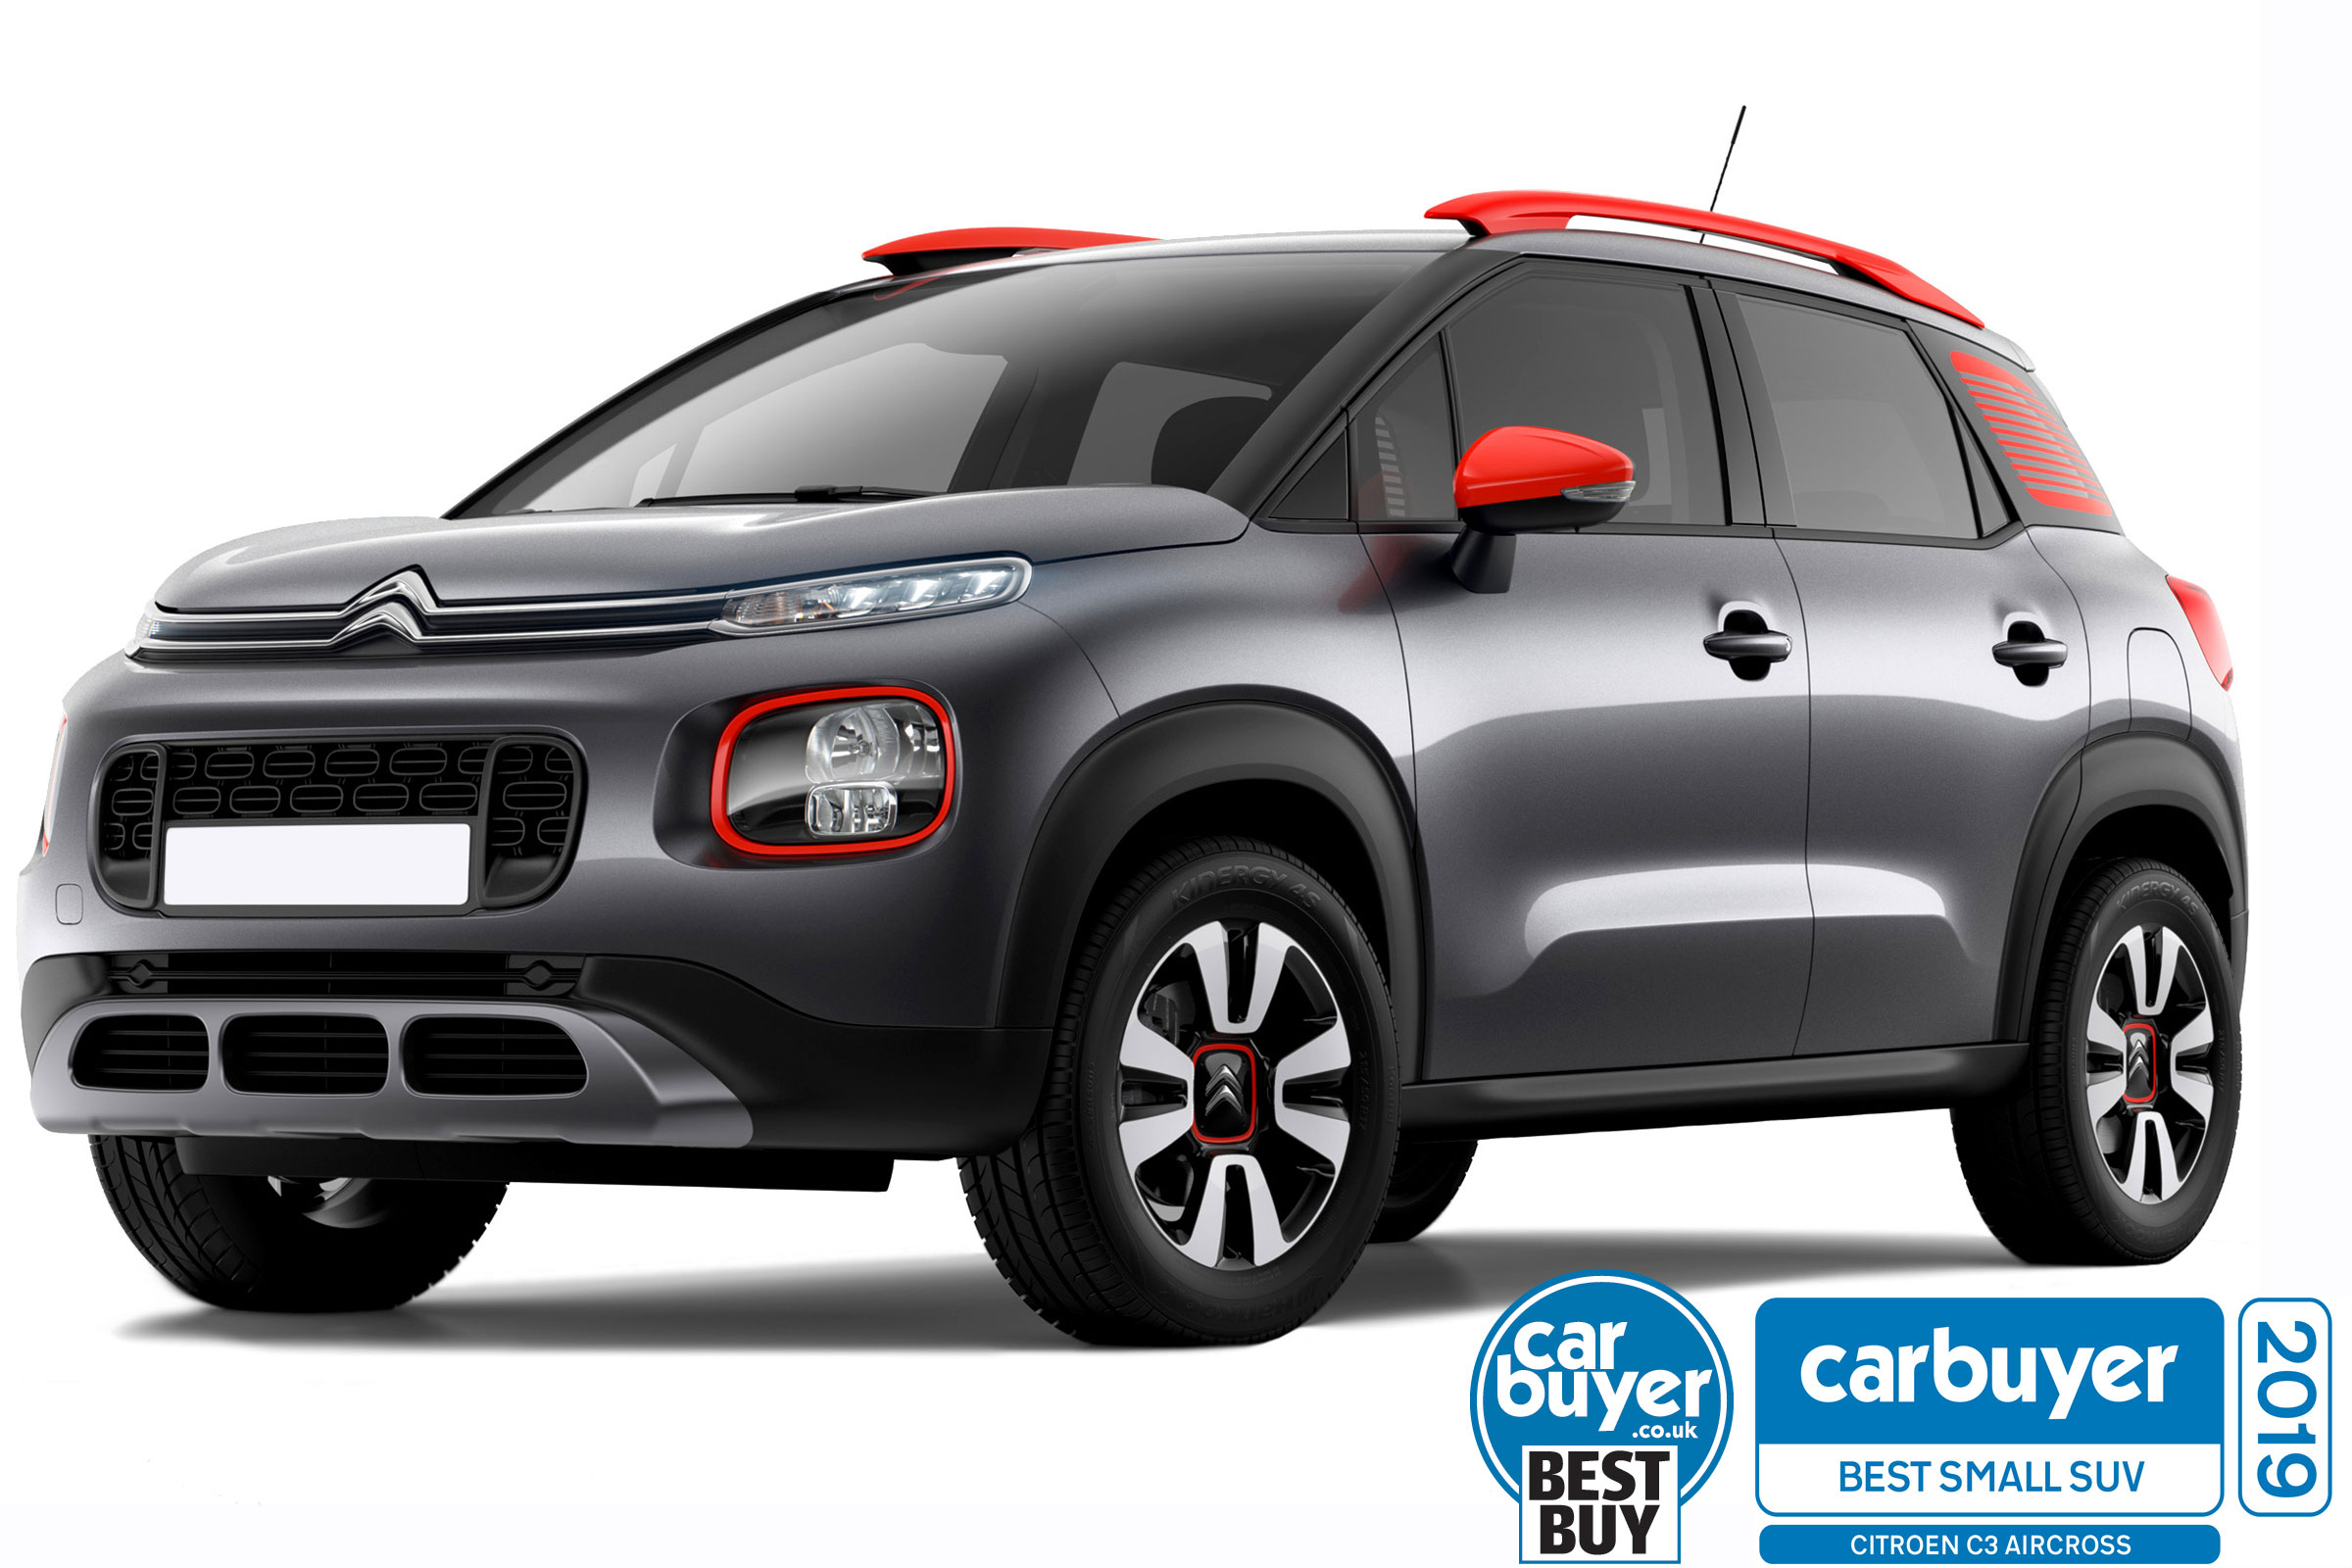 Citroen C3 Aircross Suv Review Carbuyer